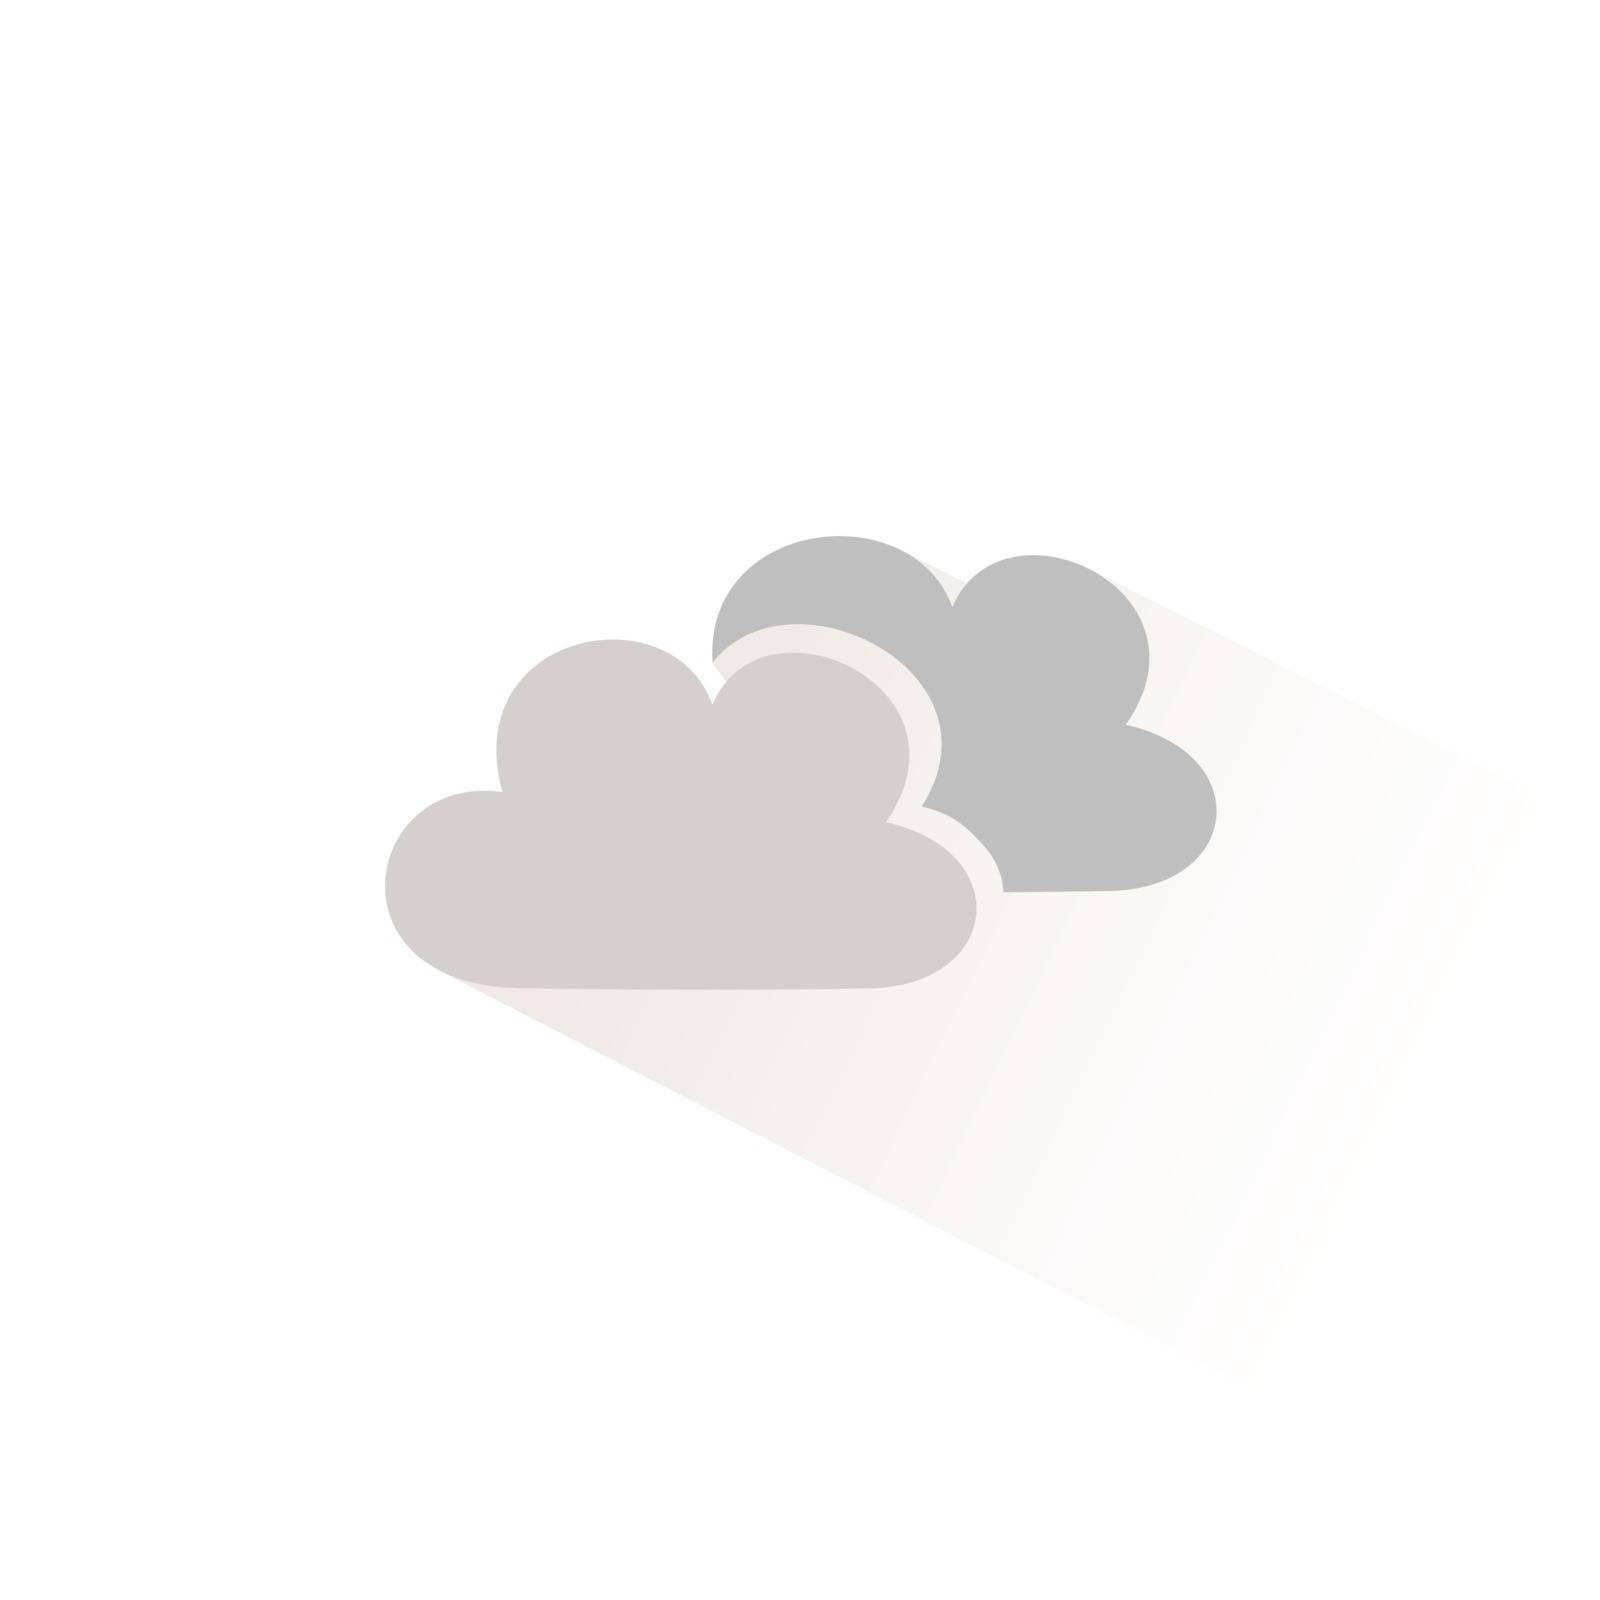 Clouds icon with shadow. Flat vector illustration by Imaagio